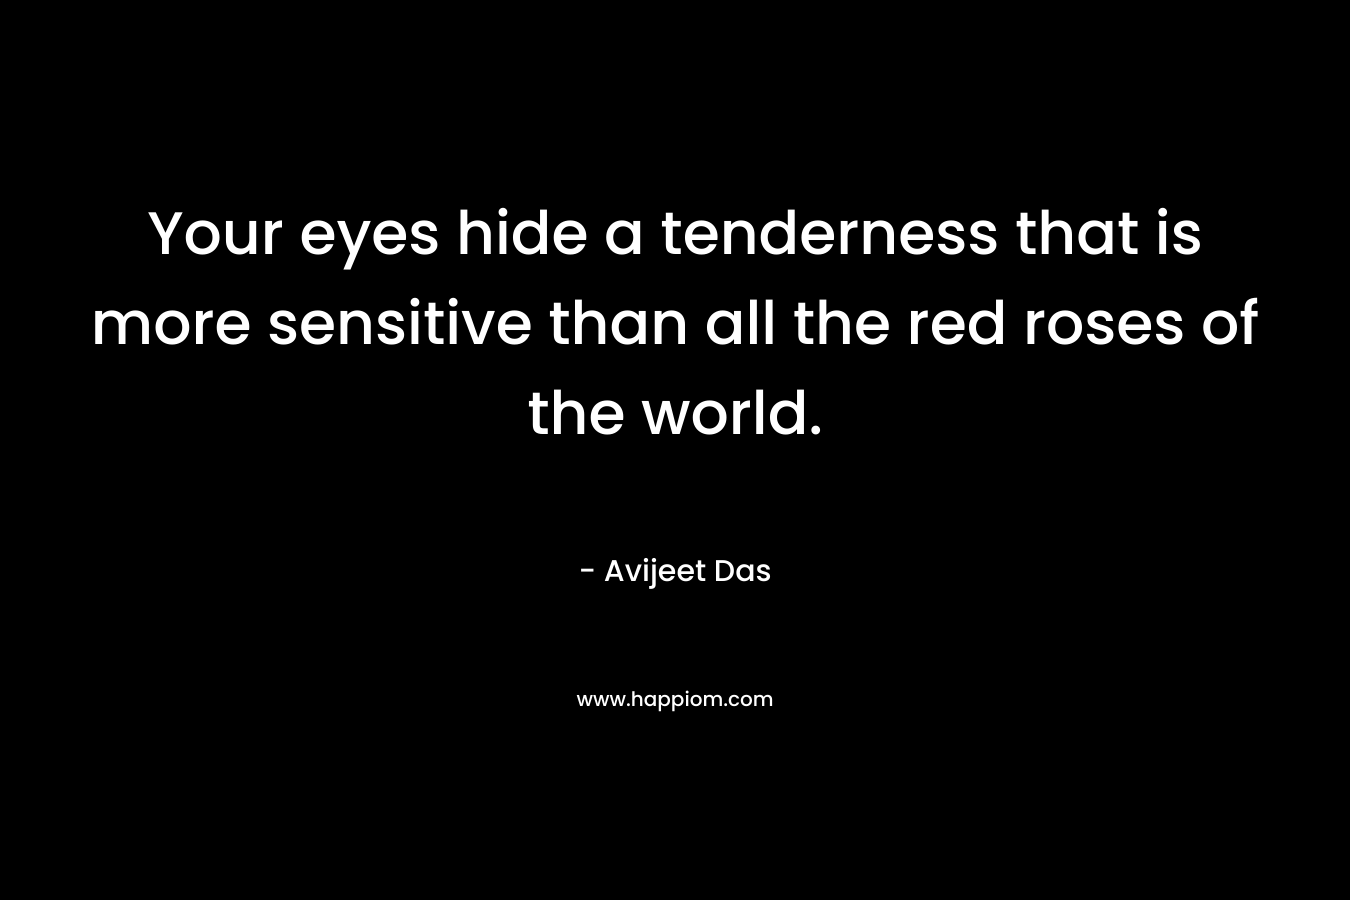 Your eyes hide a tenderness that is more sensitive than all the red roses of the world. – Avijeet Das